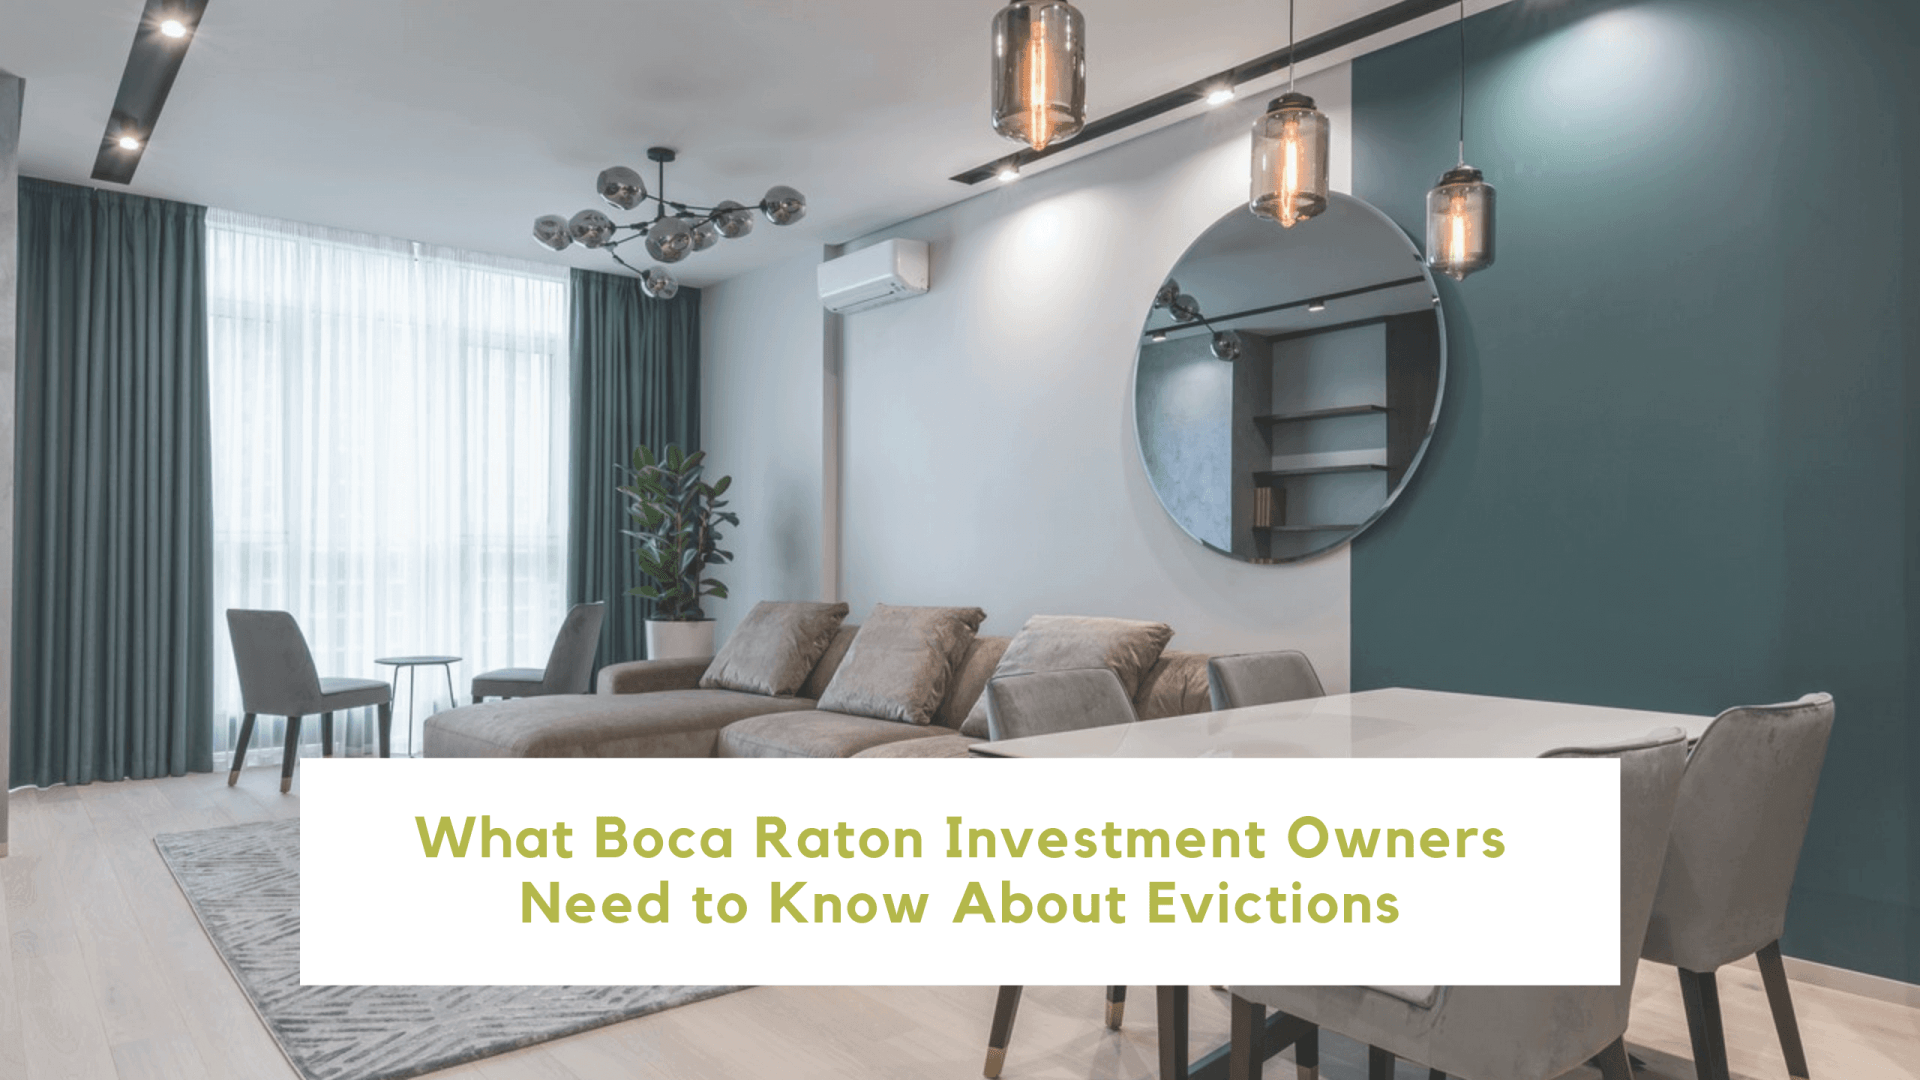 What Boca Raton Investment Owners Need to Know About Evictions